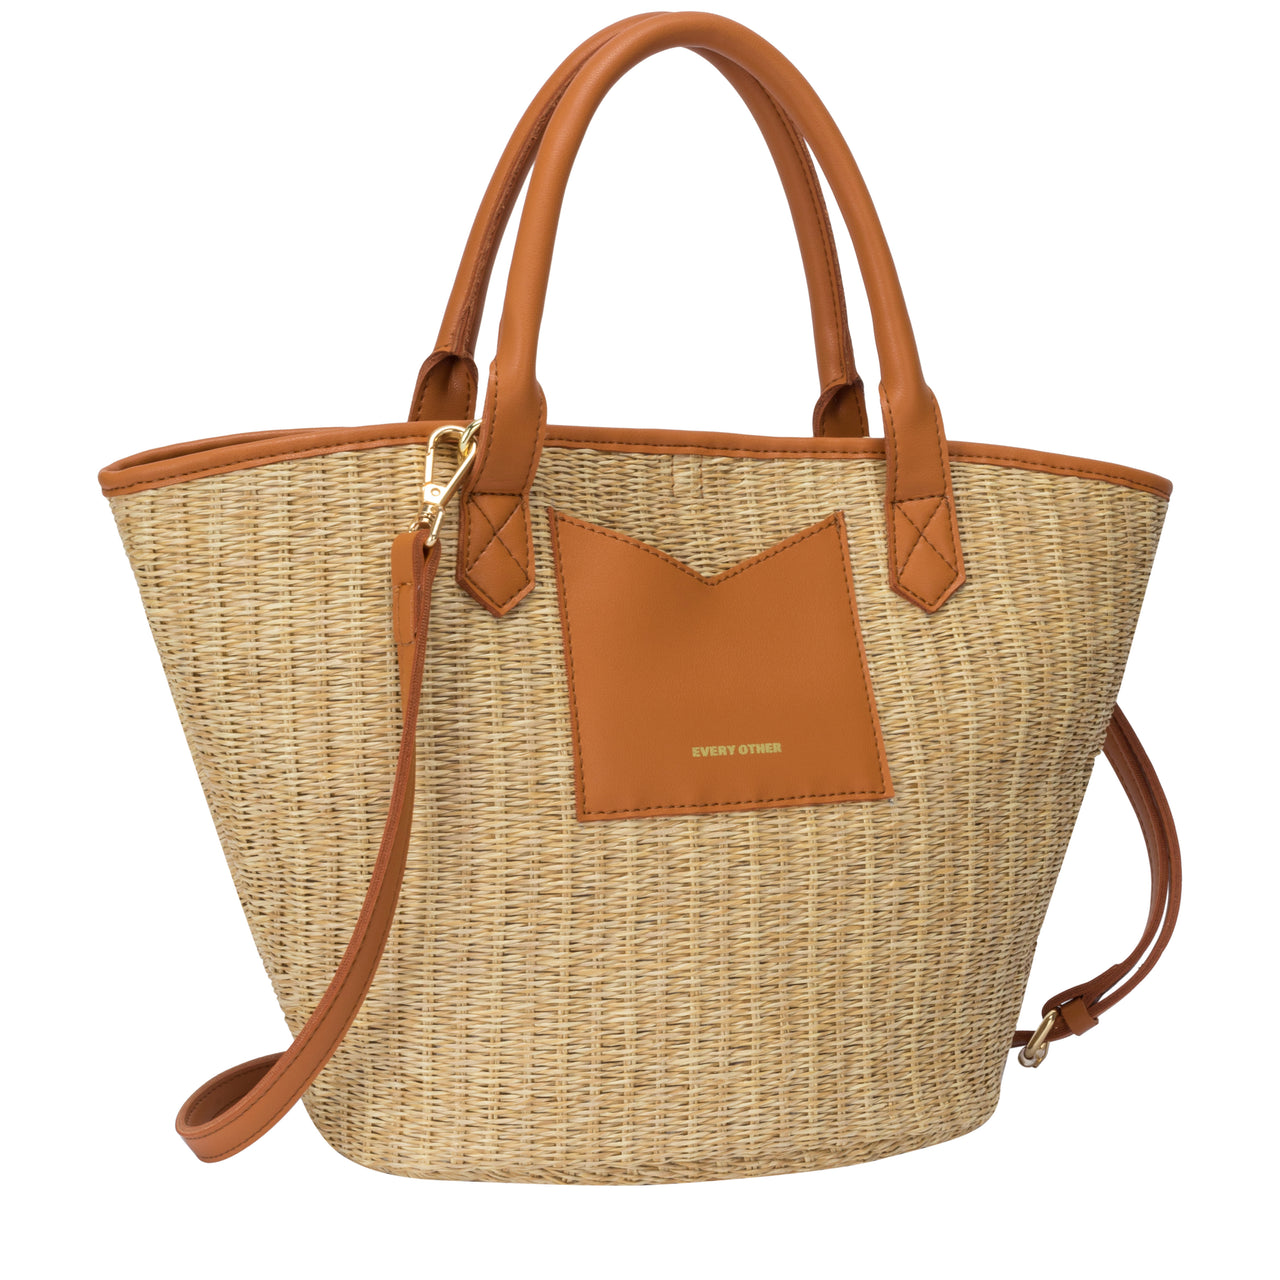 Every Other Large Twin Tote Bag - Tan